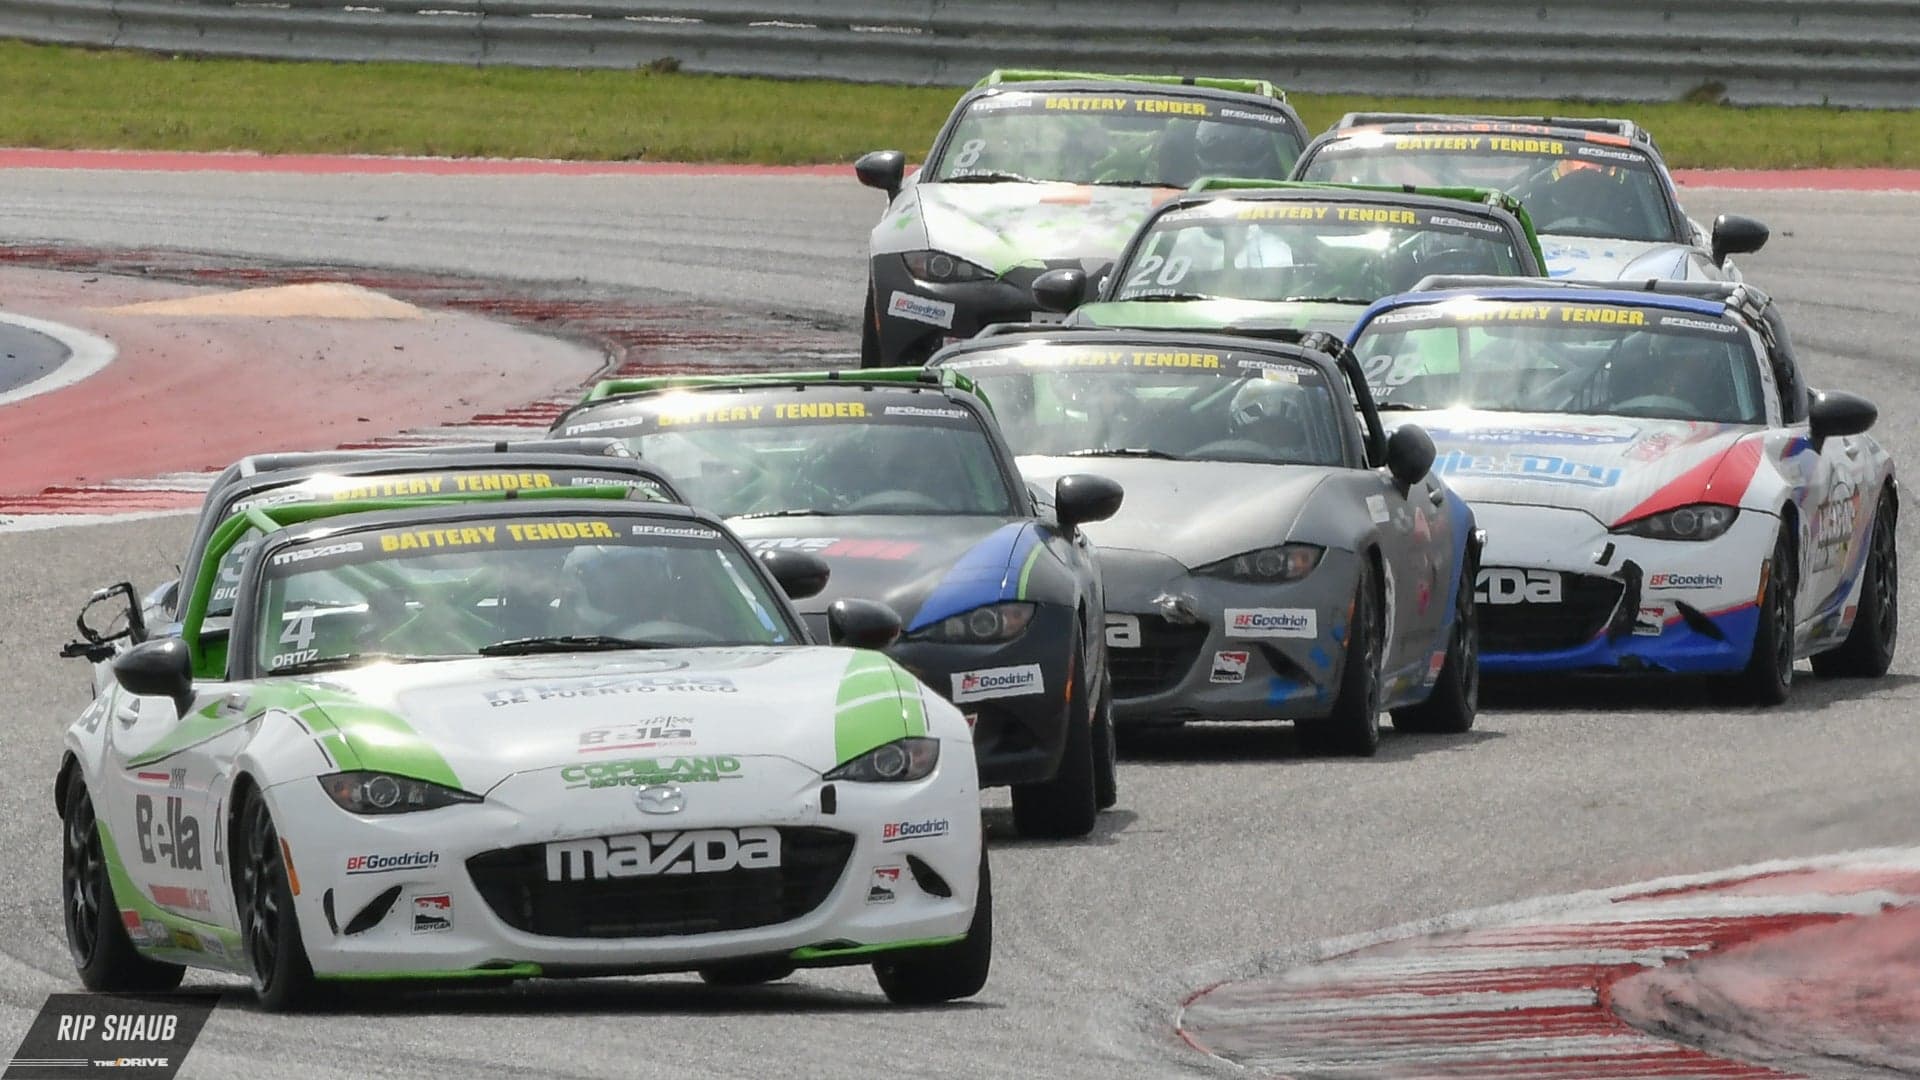 Global Mazda MX-5 Cup: Kicking off 2018 Deep in the Heart of Texas